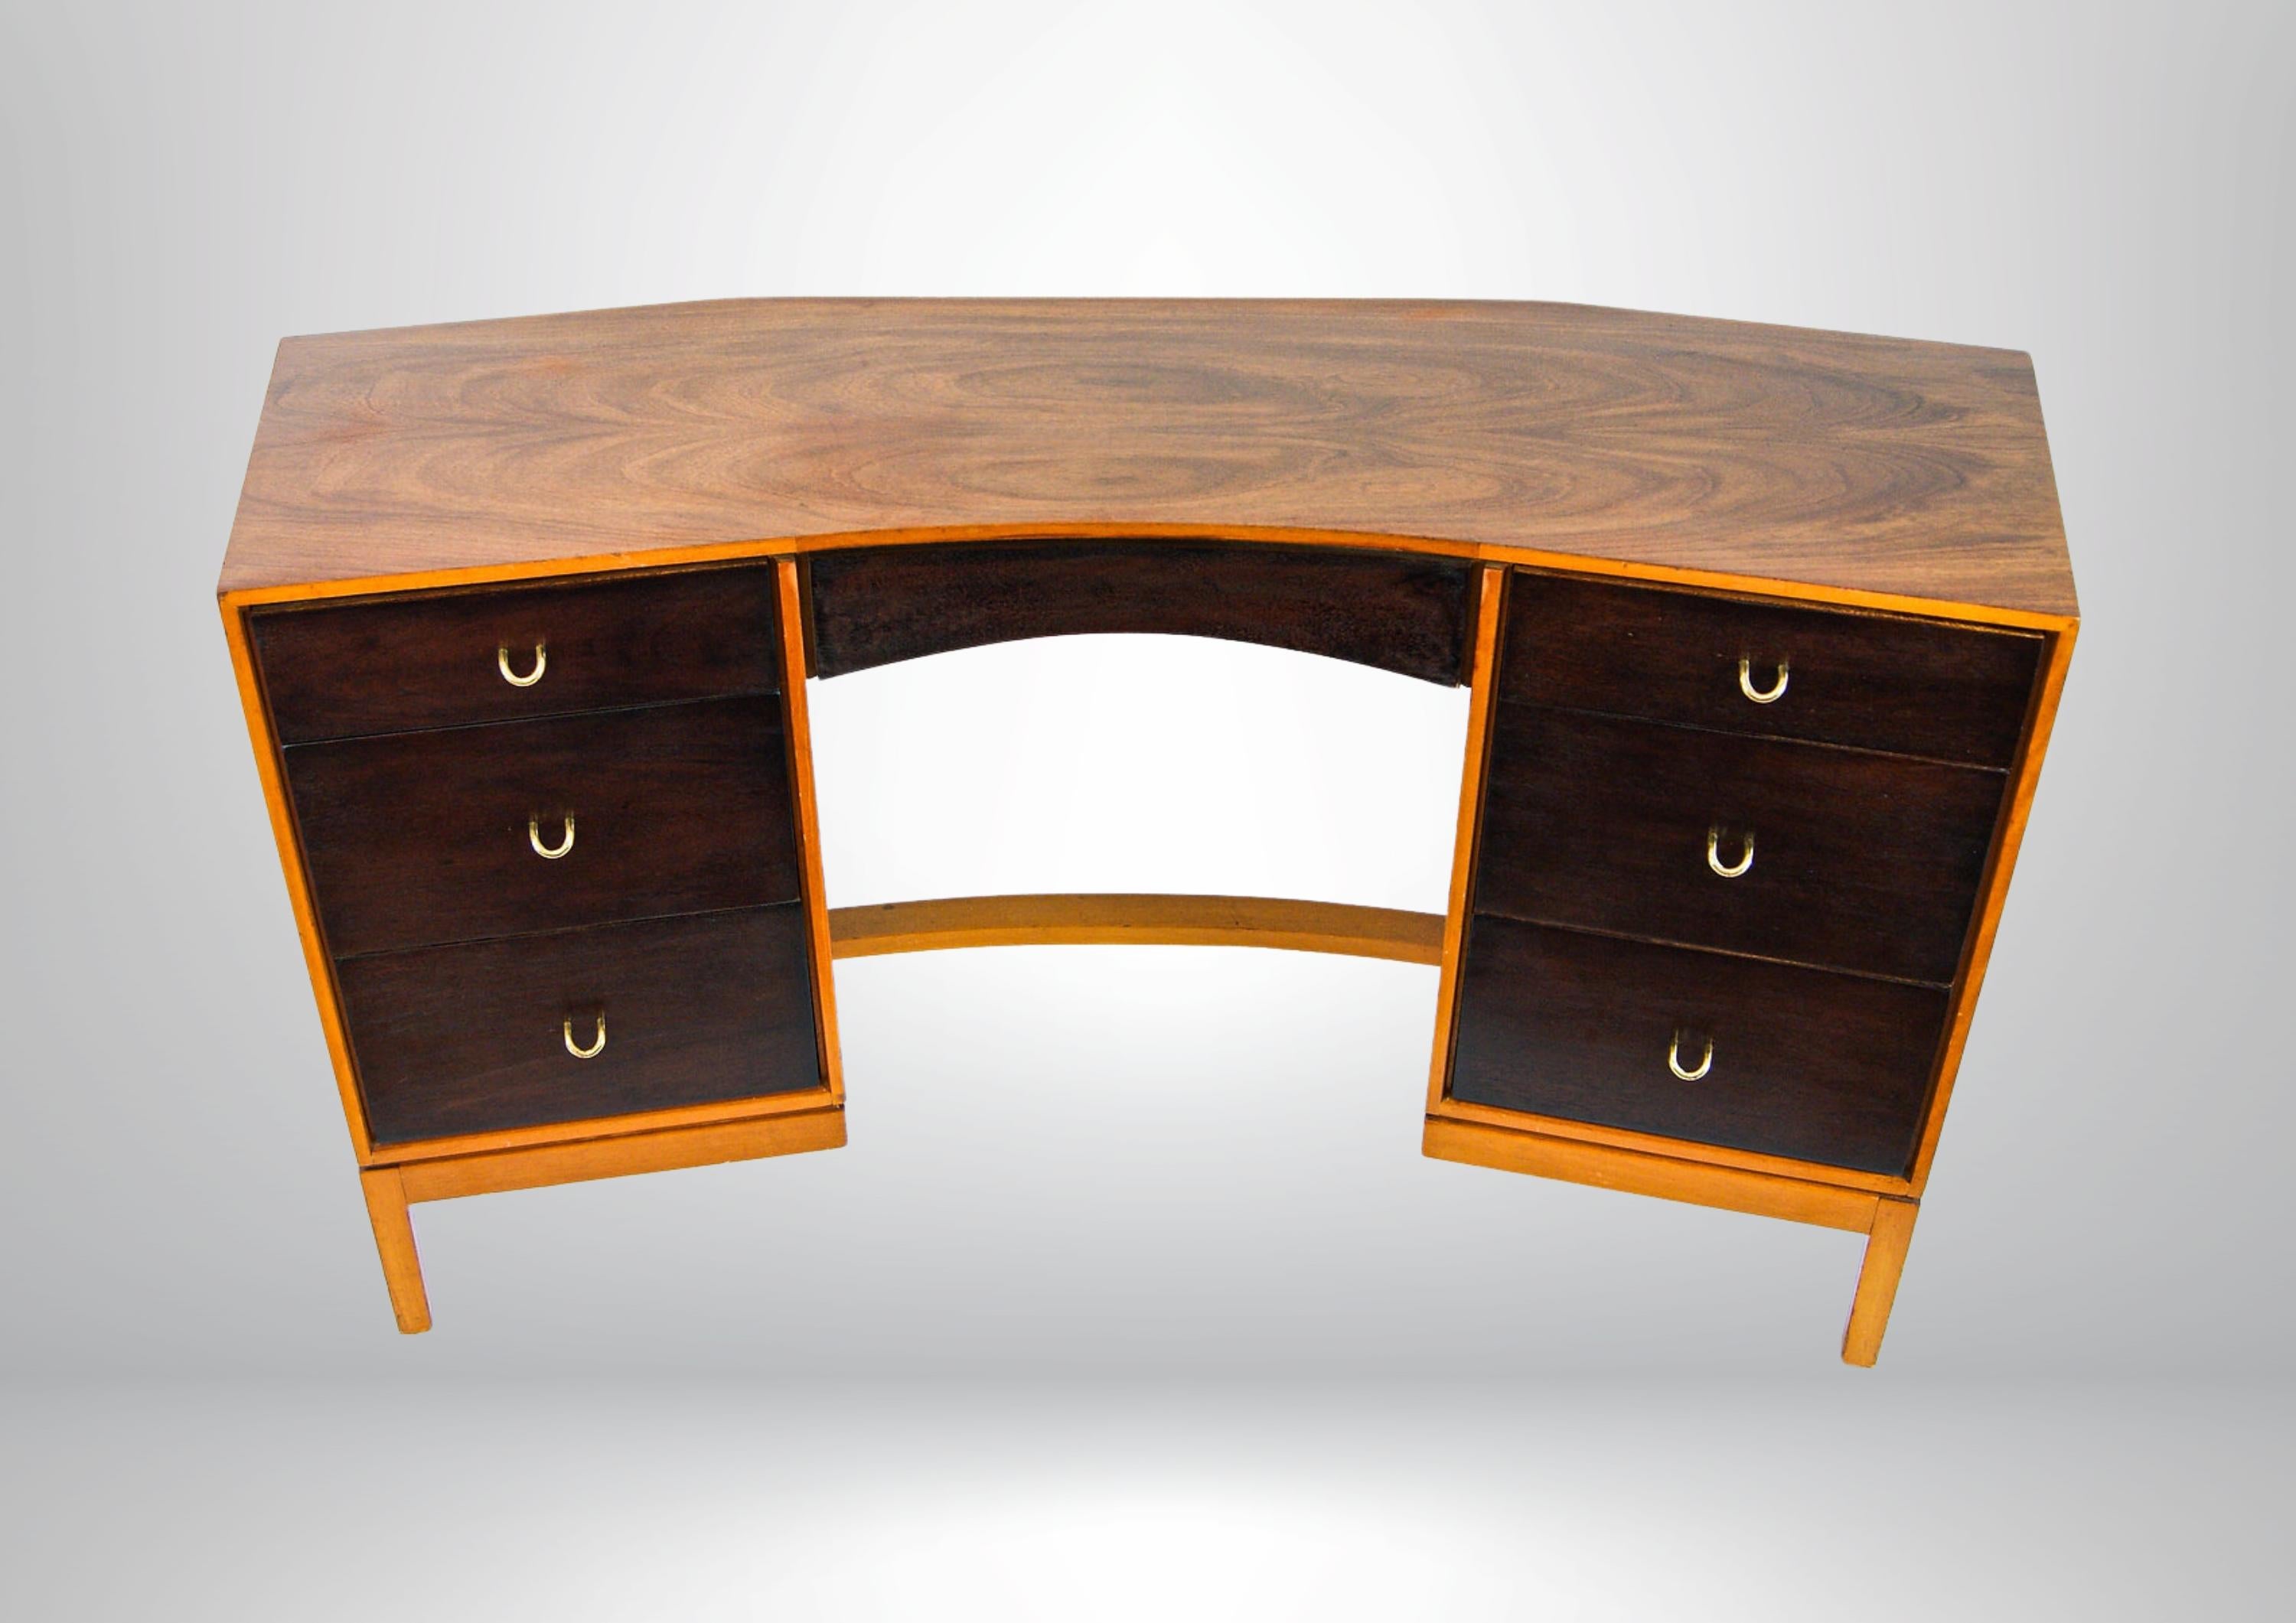 Mid-century British made desk by John & Sylvia Reid for Stag furniture.
Walnut veneer top and sides, with a darker rosewood finish to the front.
Stands on double pedestals with a 6 drawer compartments.
The drawers have solid brass curved handles,